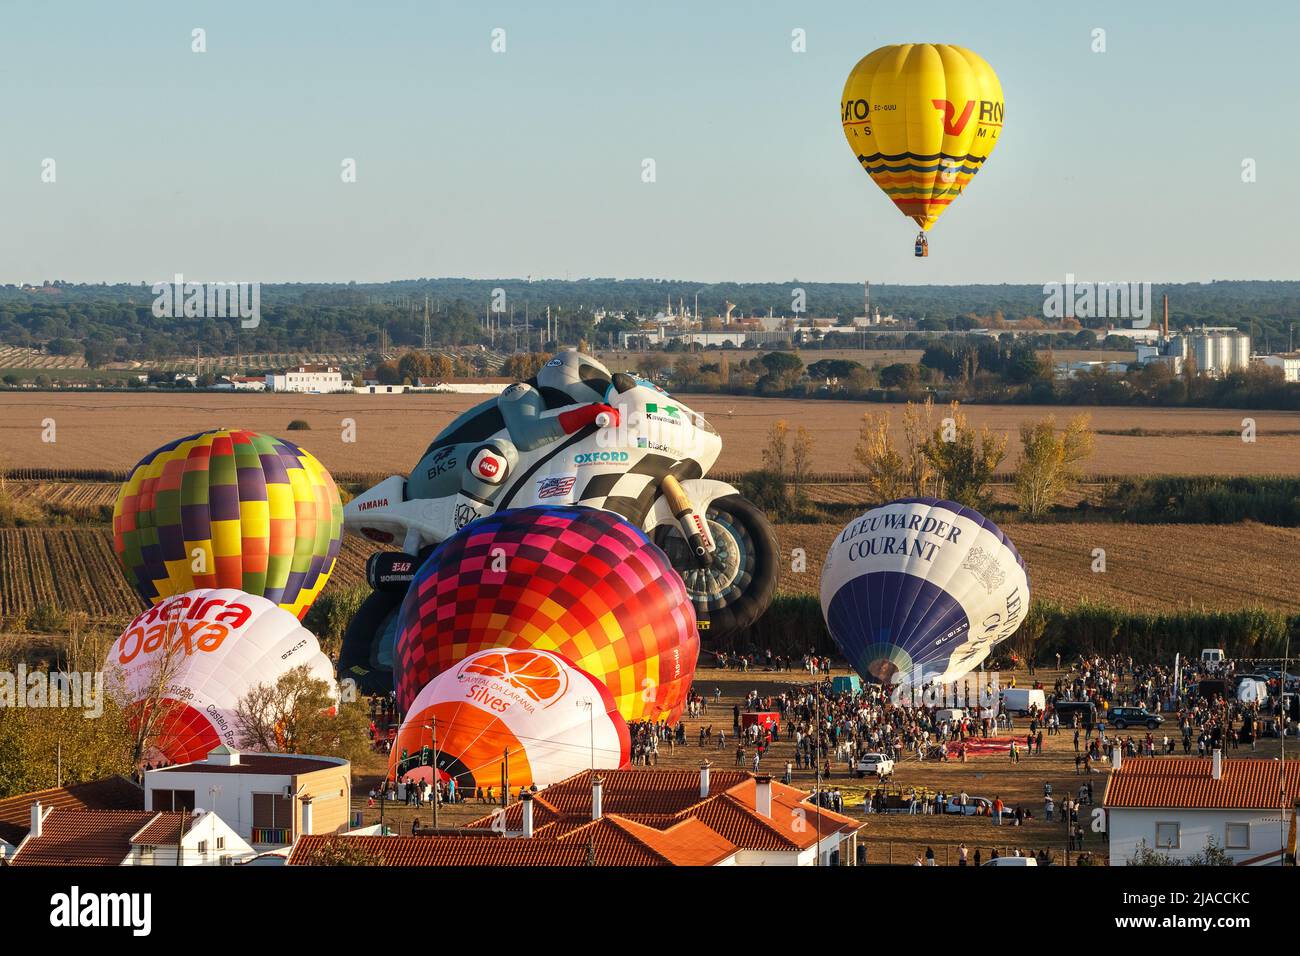 Coruche, Portugal - November 13, 2021: Hot air balloon flying and other balloons being inflated at the Ballooning Festival in Coruche, Portugal. Stock Photo